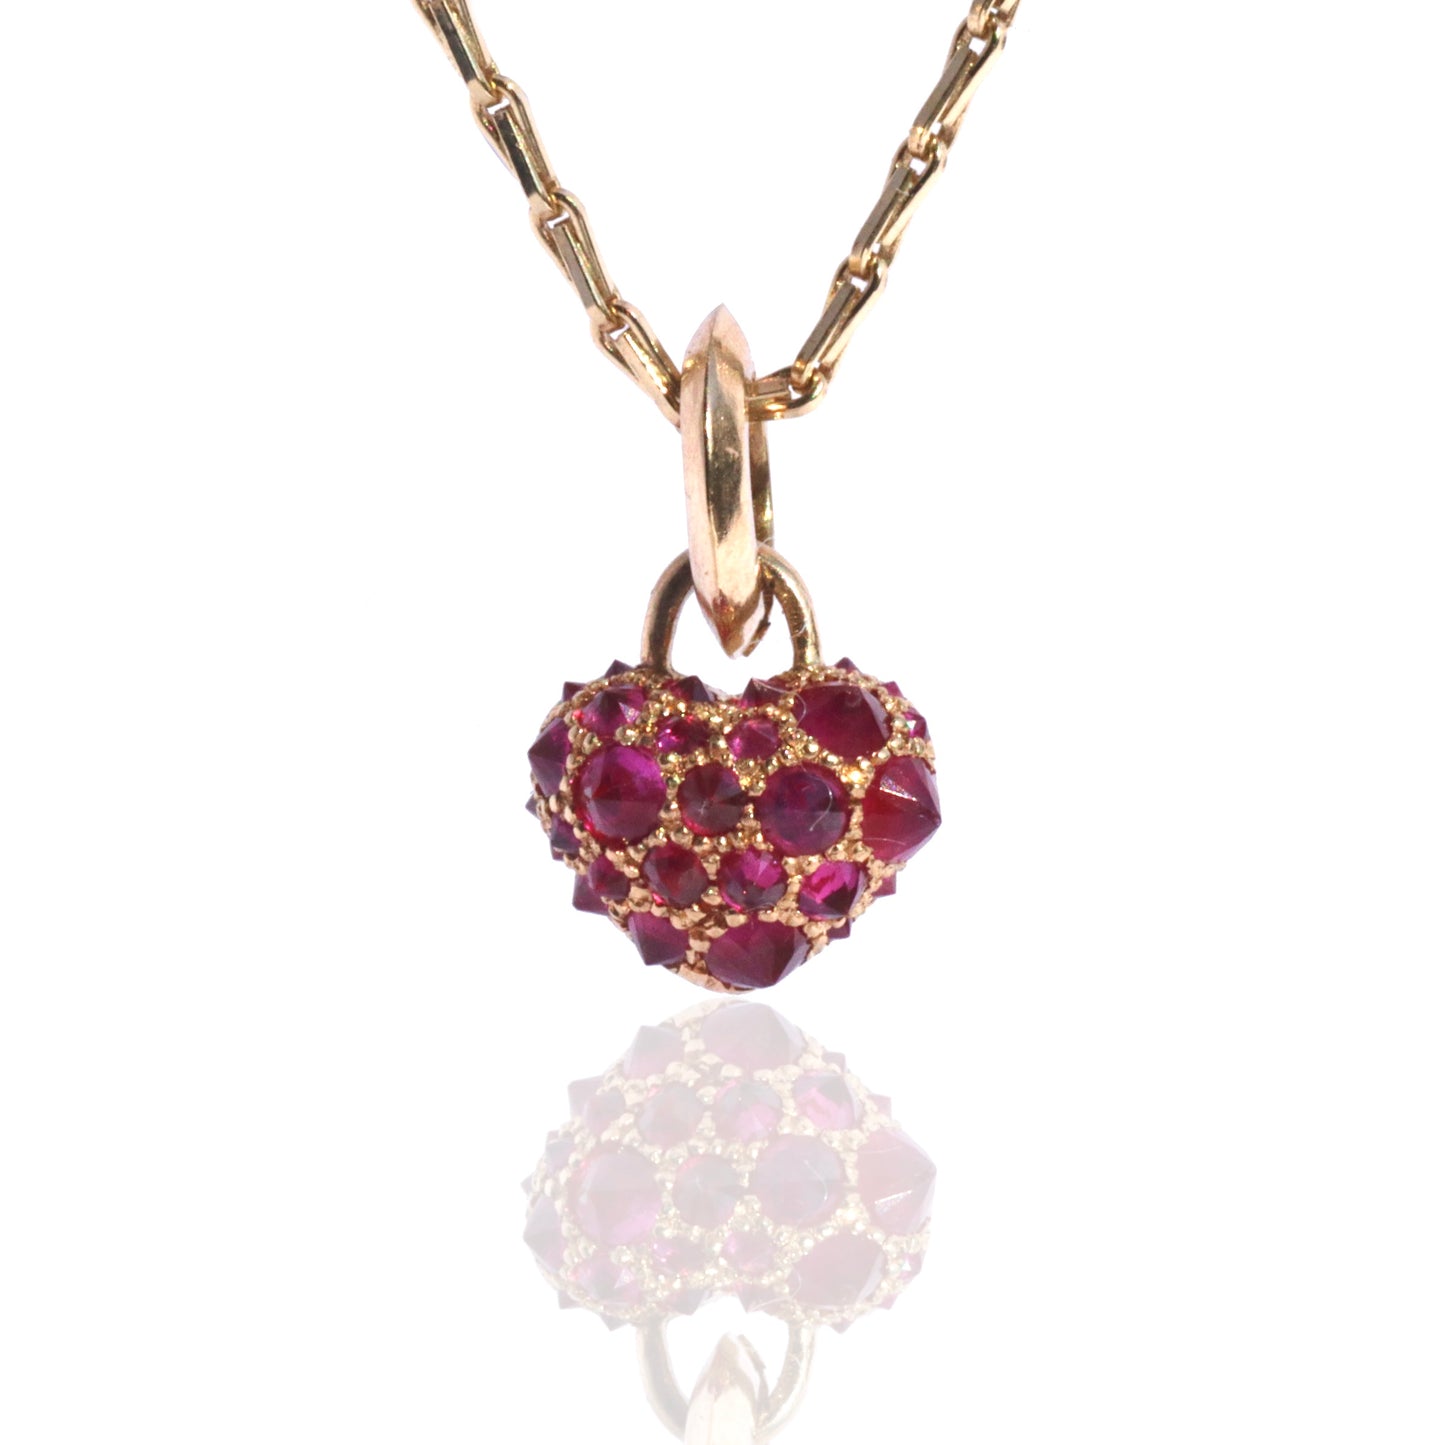 'Tough Love' Barbed Ruby Heart Pendant